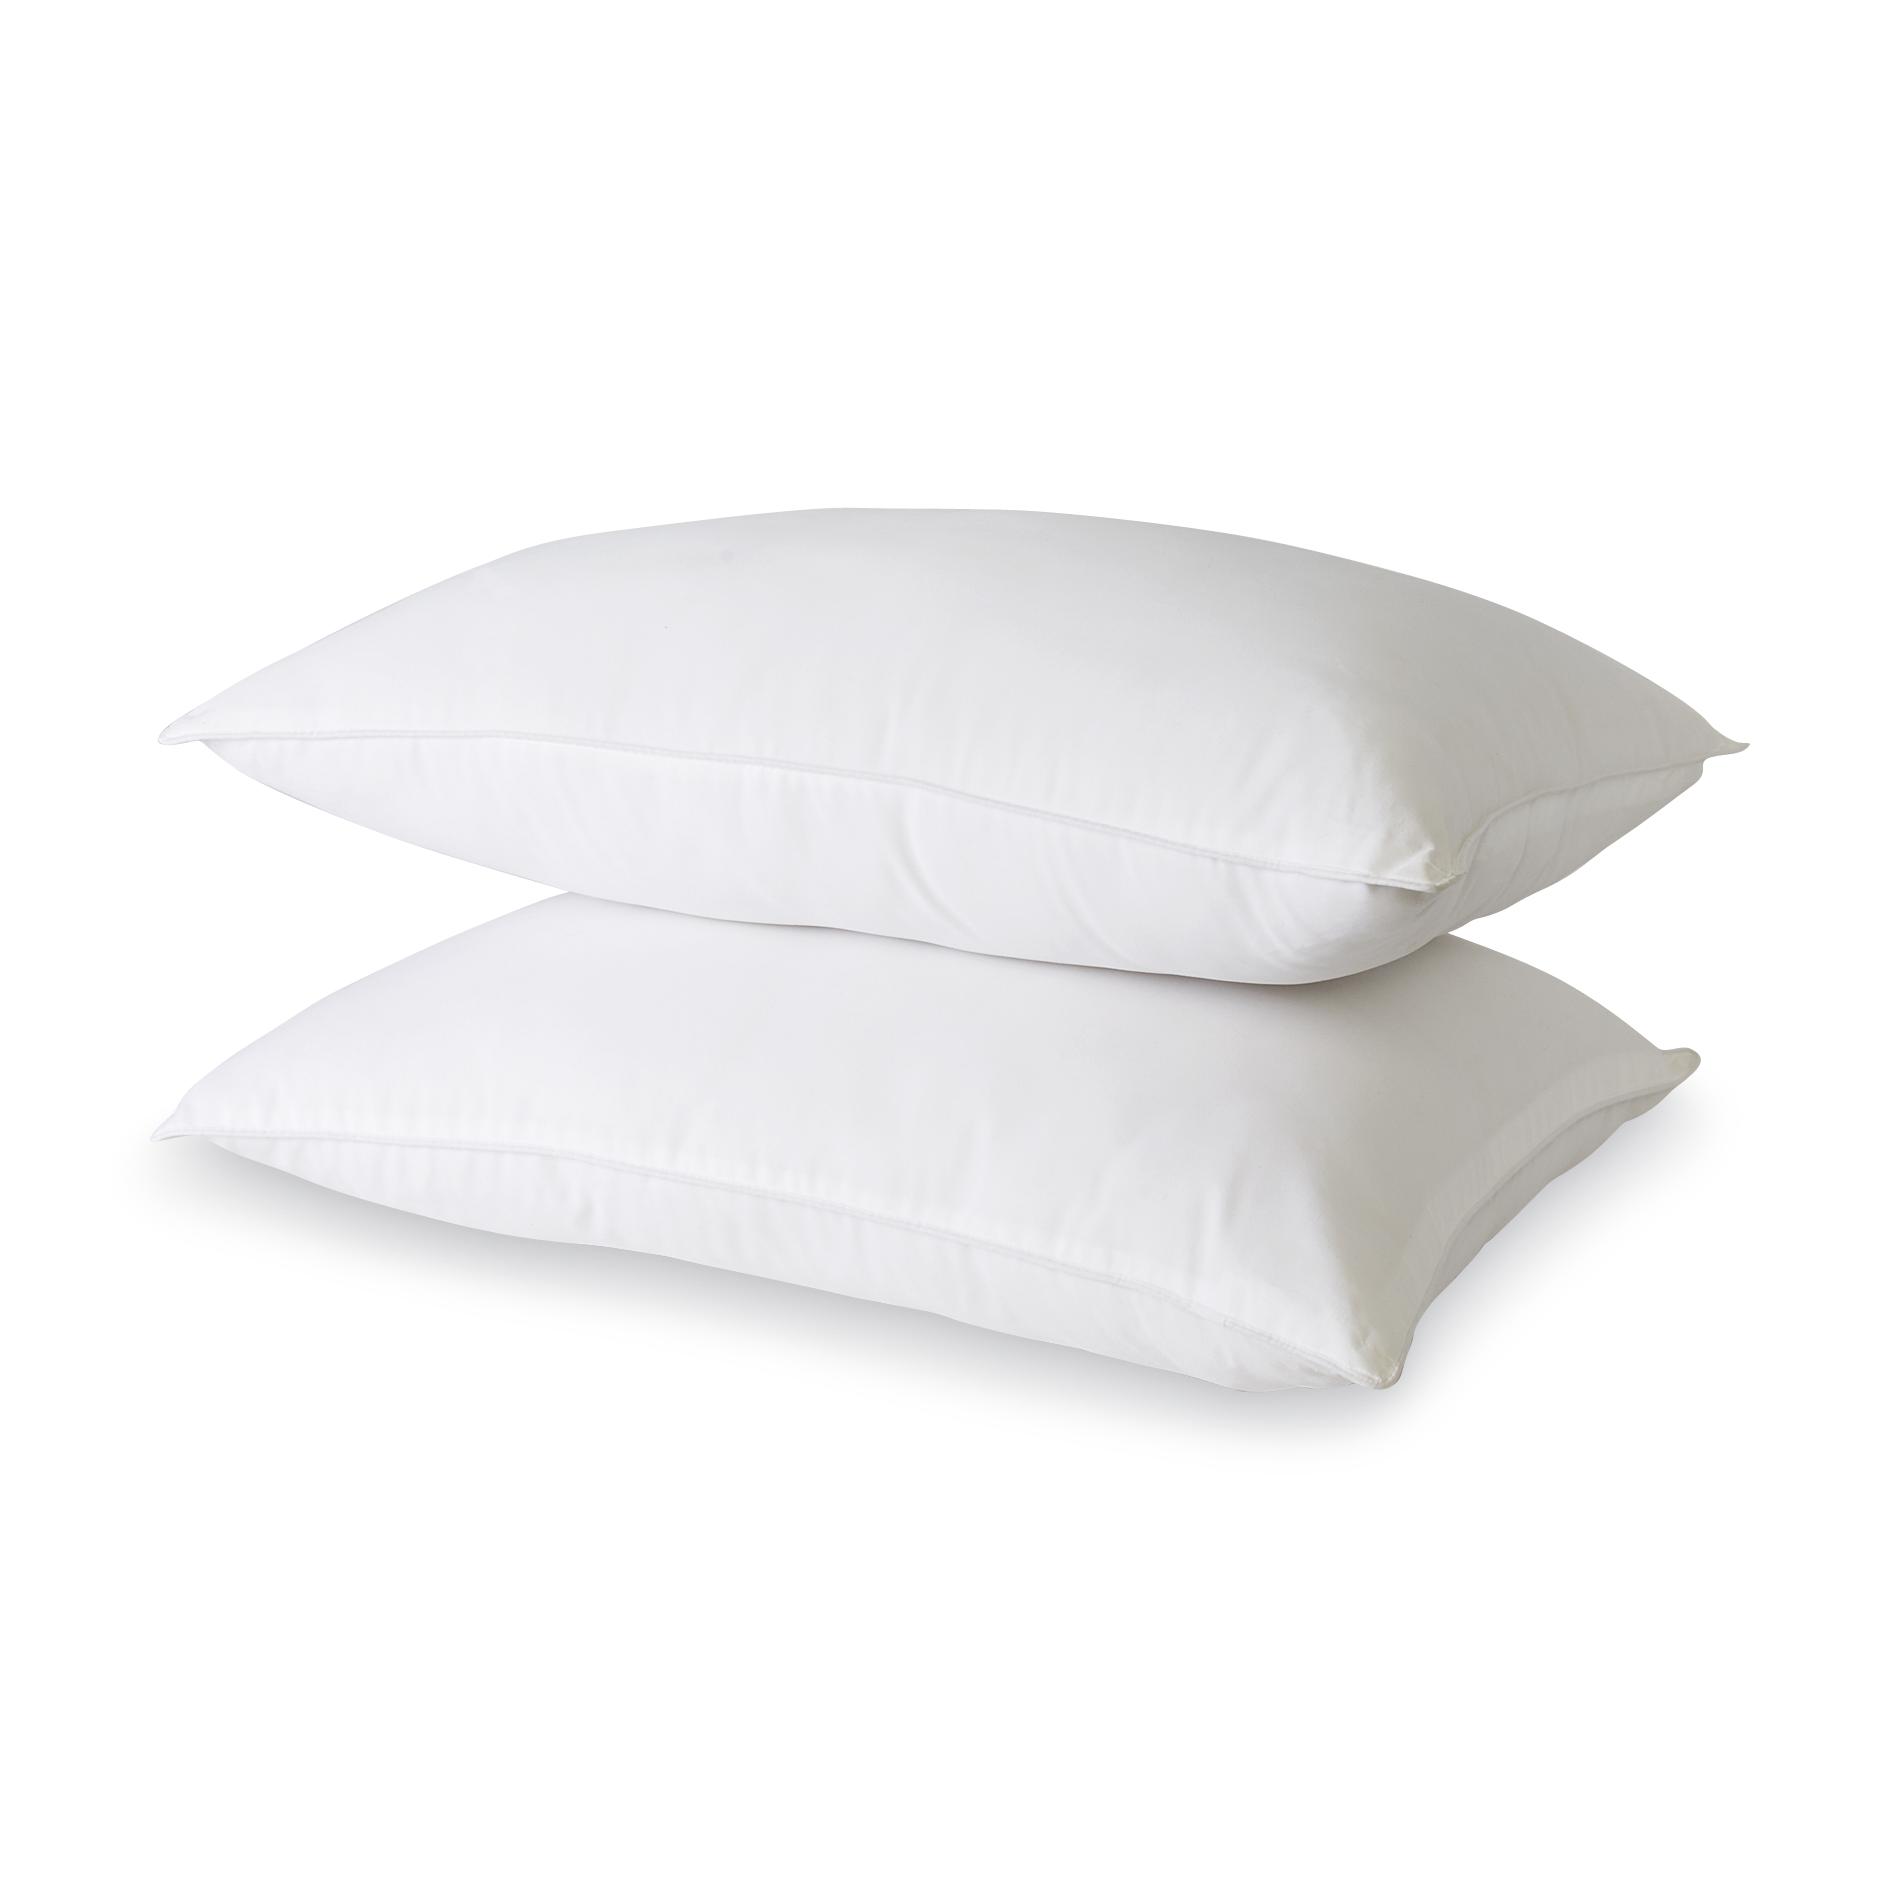 Colormate 2-Pack Standard Pillows